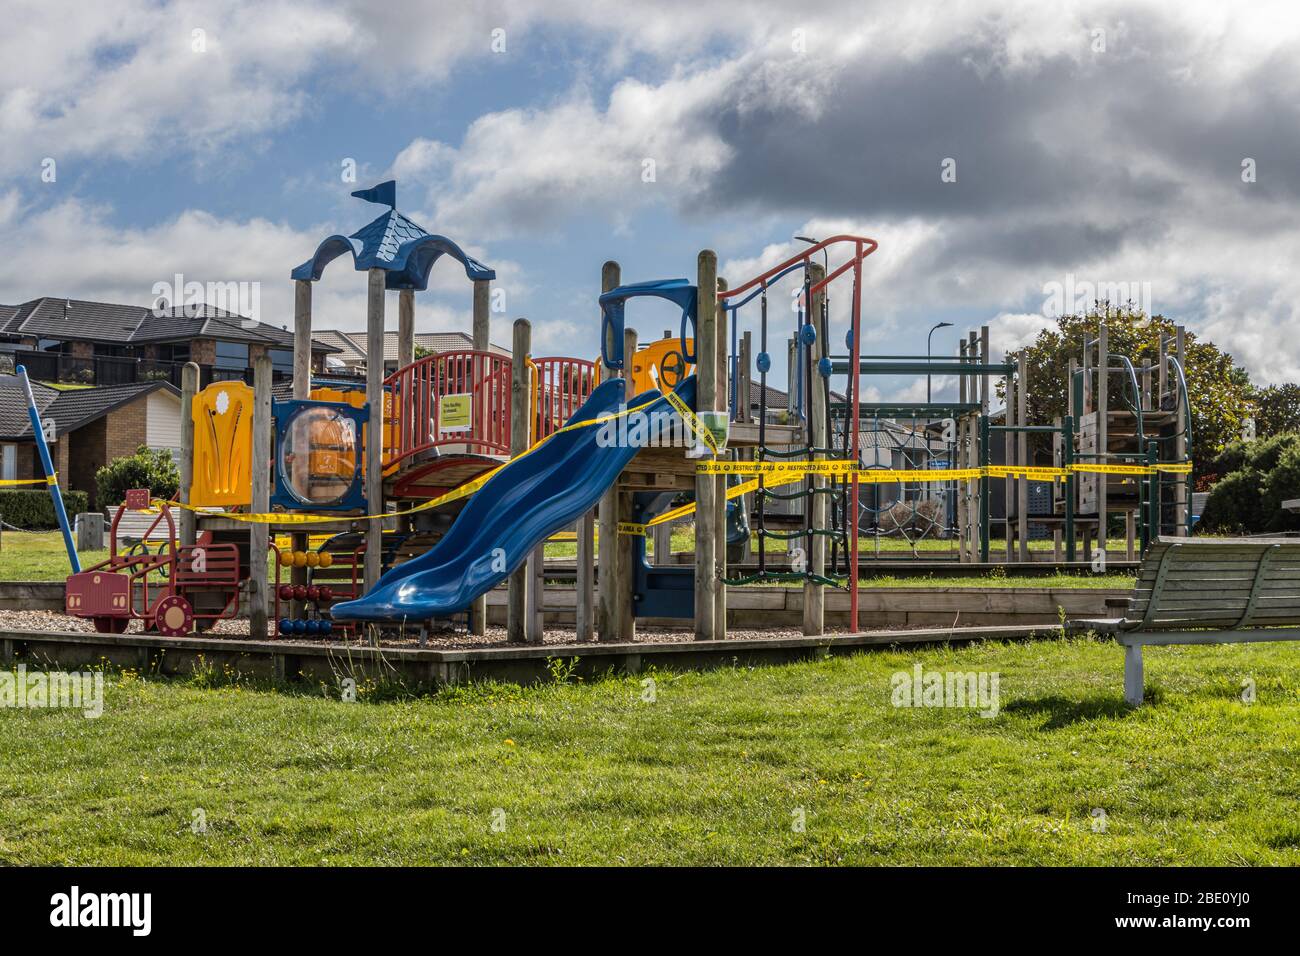 Children's Playground taped off during COVID 19 Lockdown Stock Photo